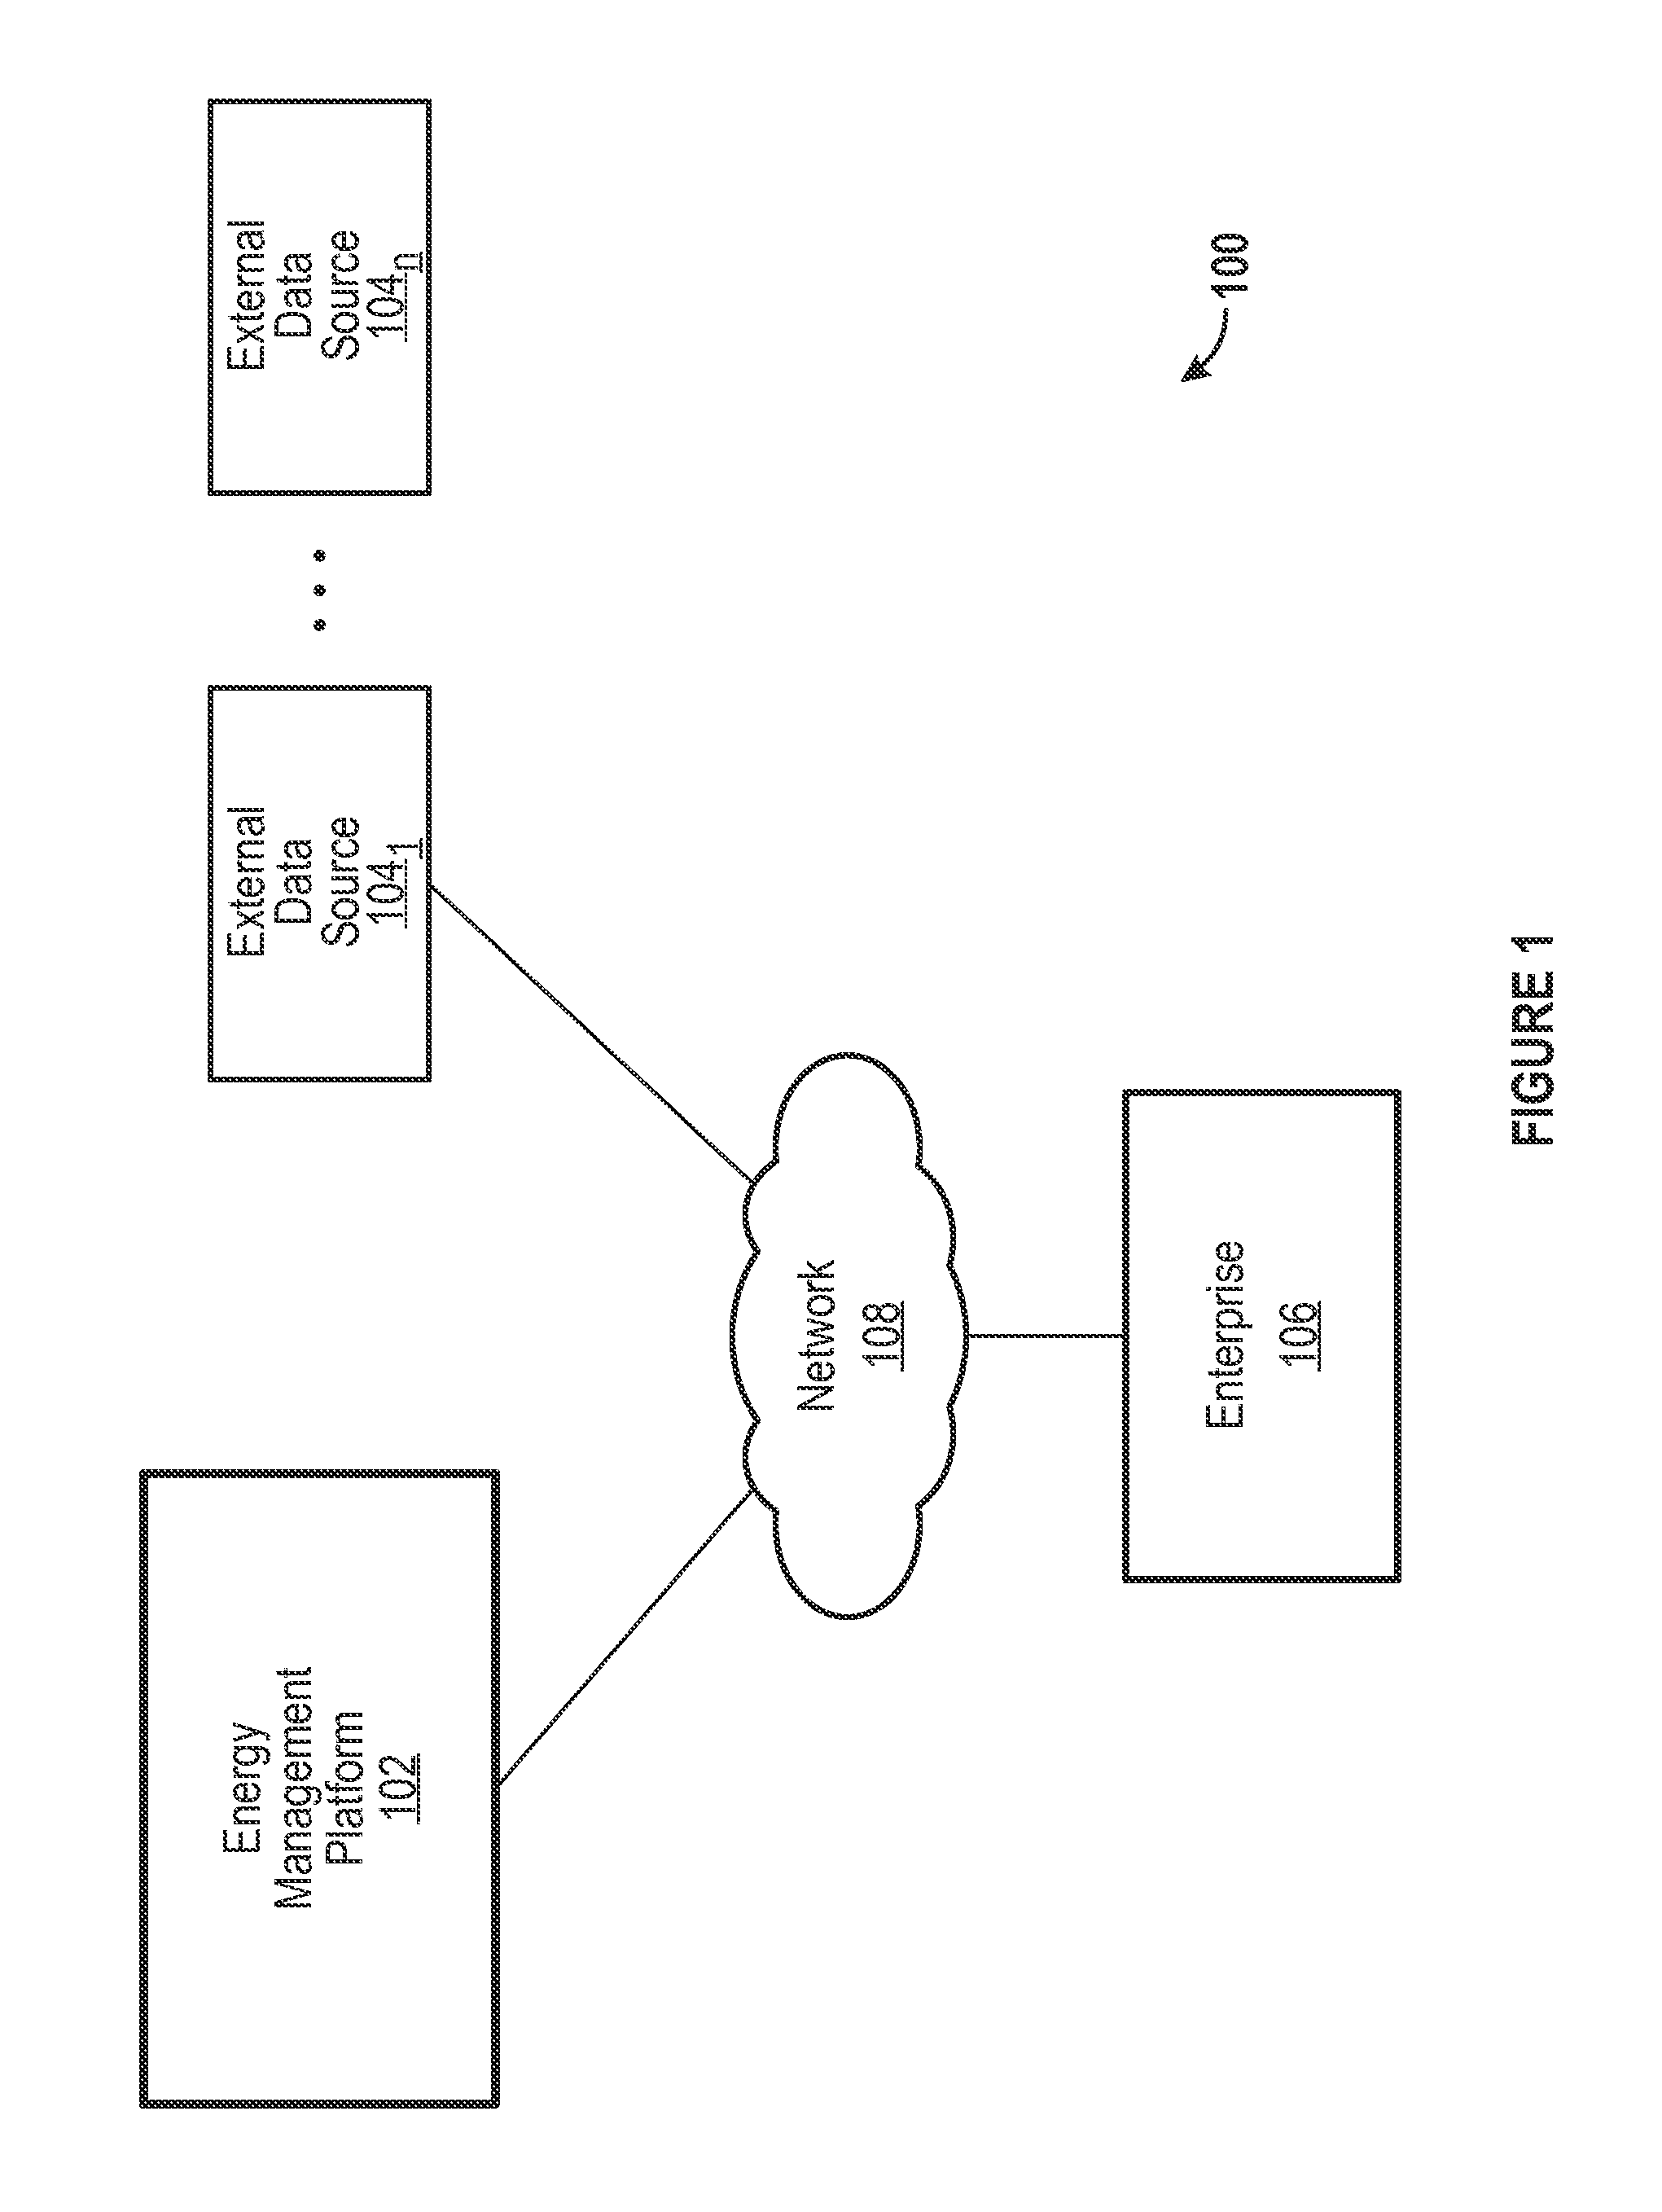 Systems and methods for processing data relating to energy usage